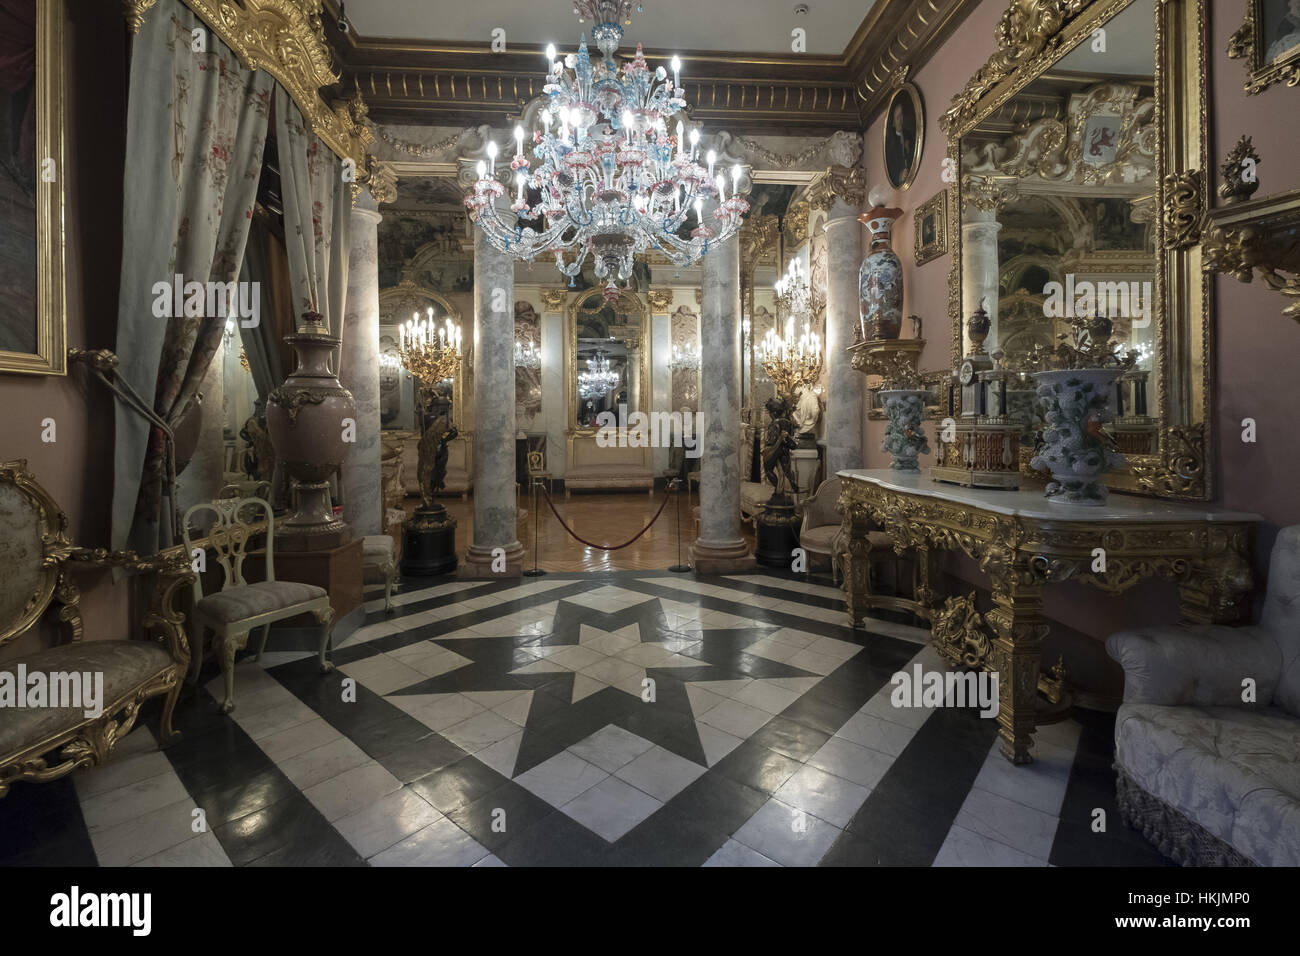 The Cerralbo Museum in Madrid (Spain), located in the Cerralbo Palace, houses an old private collection of works of art, archaeological objects and other antiquities gathered by Enrique de Aguilera y Gamboa (1845-1922), XVII Marquis de Cerralbo. December 28, 2016  Featuring: Atmosphere Where: MADRID, Spain When: 28 Dec 2016 Credit: Oscar Gonzalez/WENN.com Stock Photo